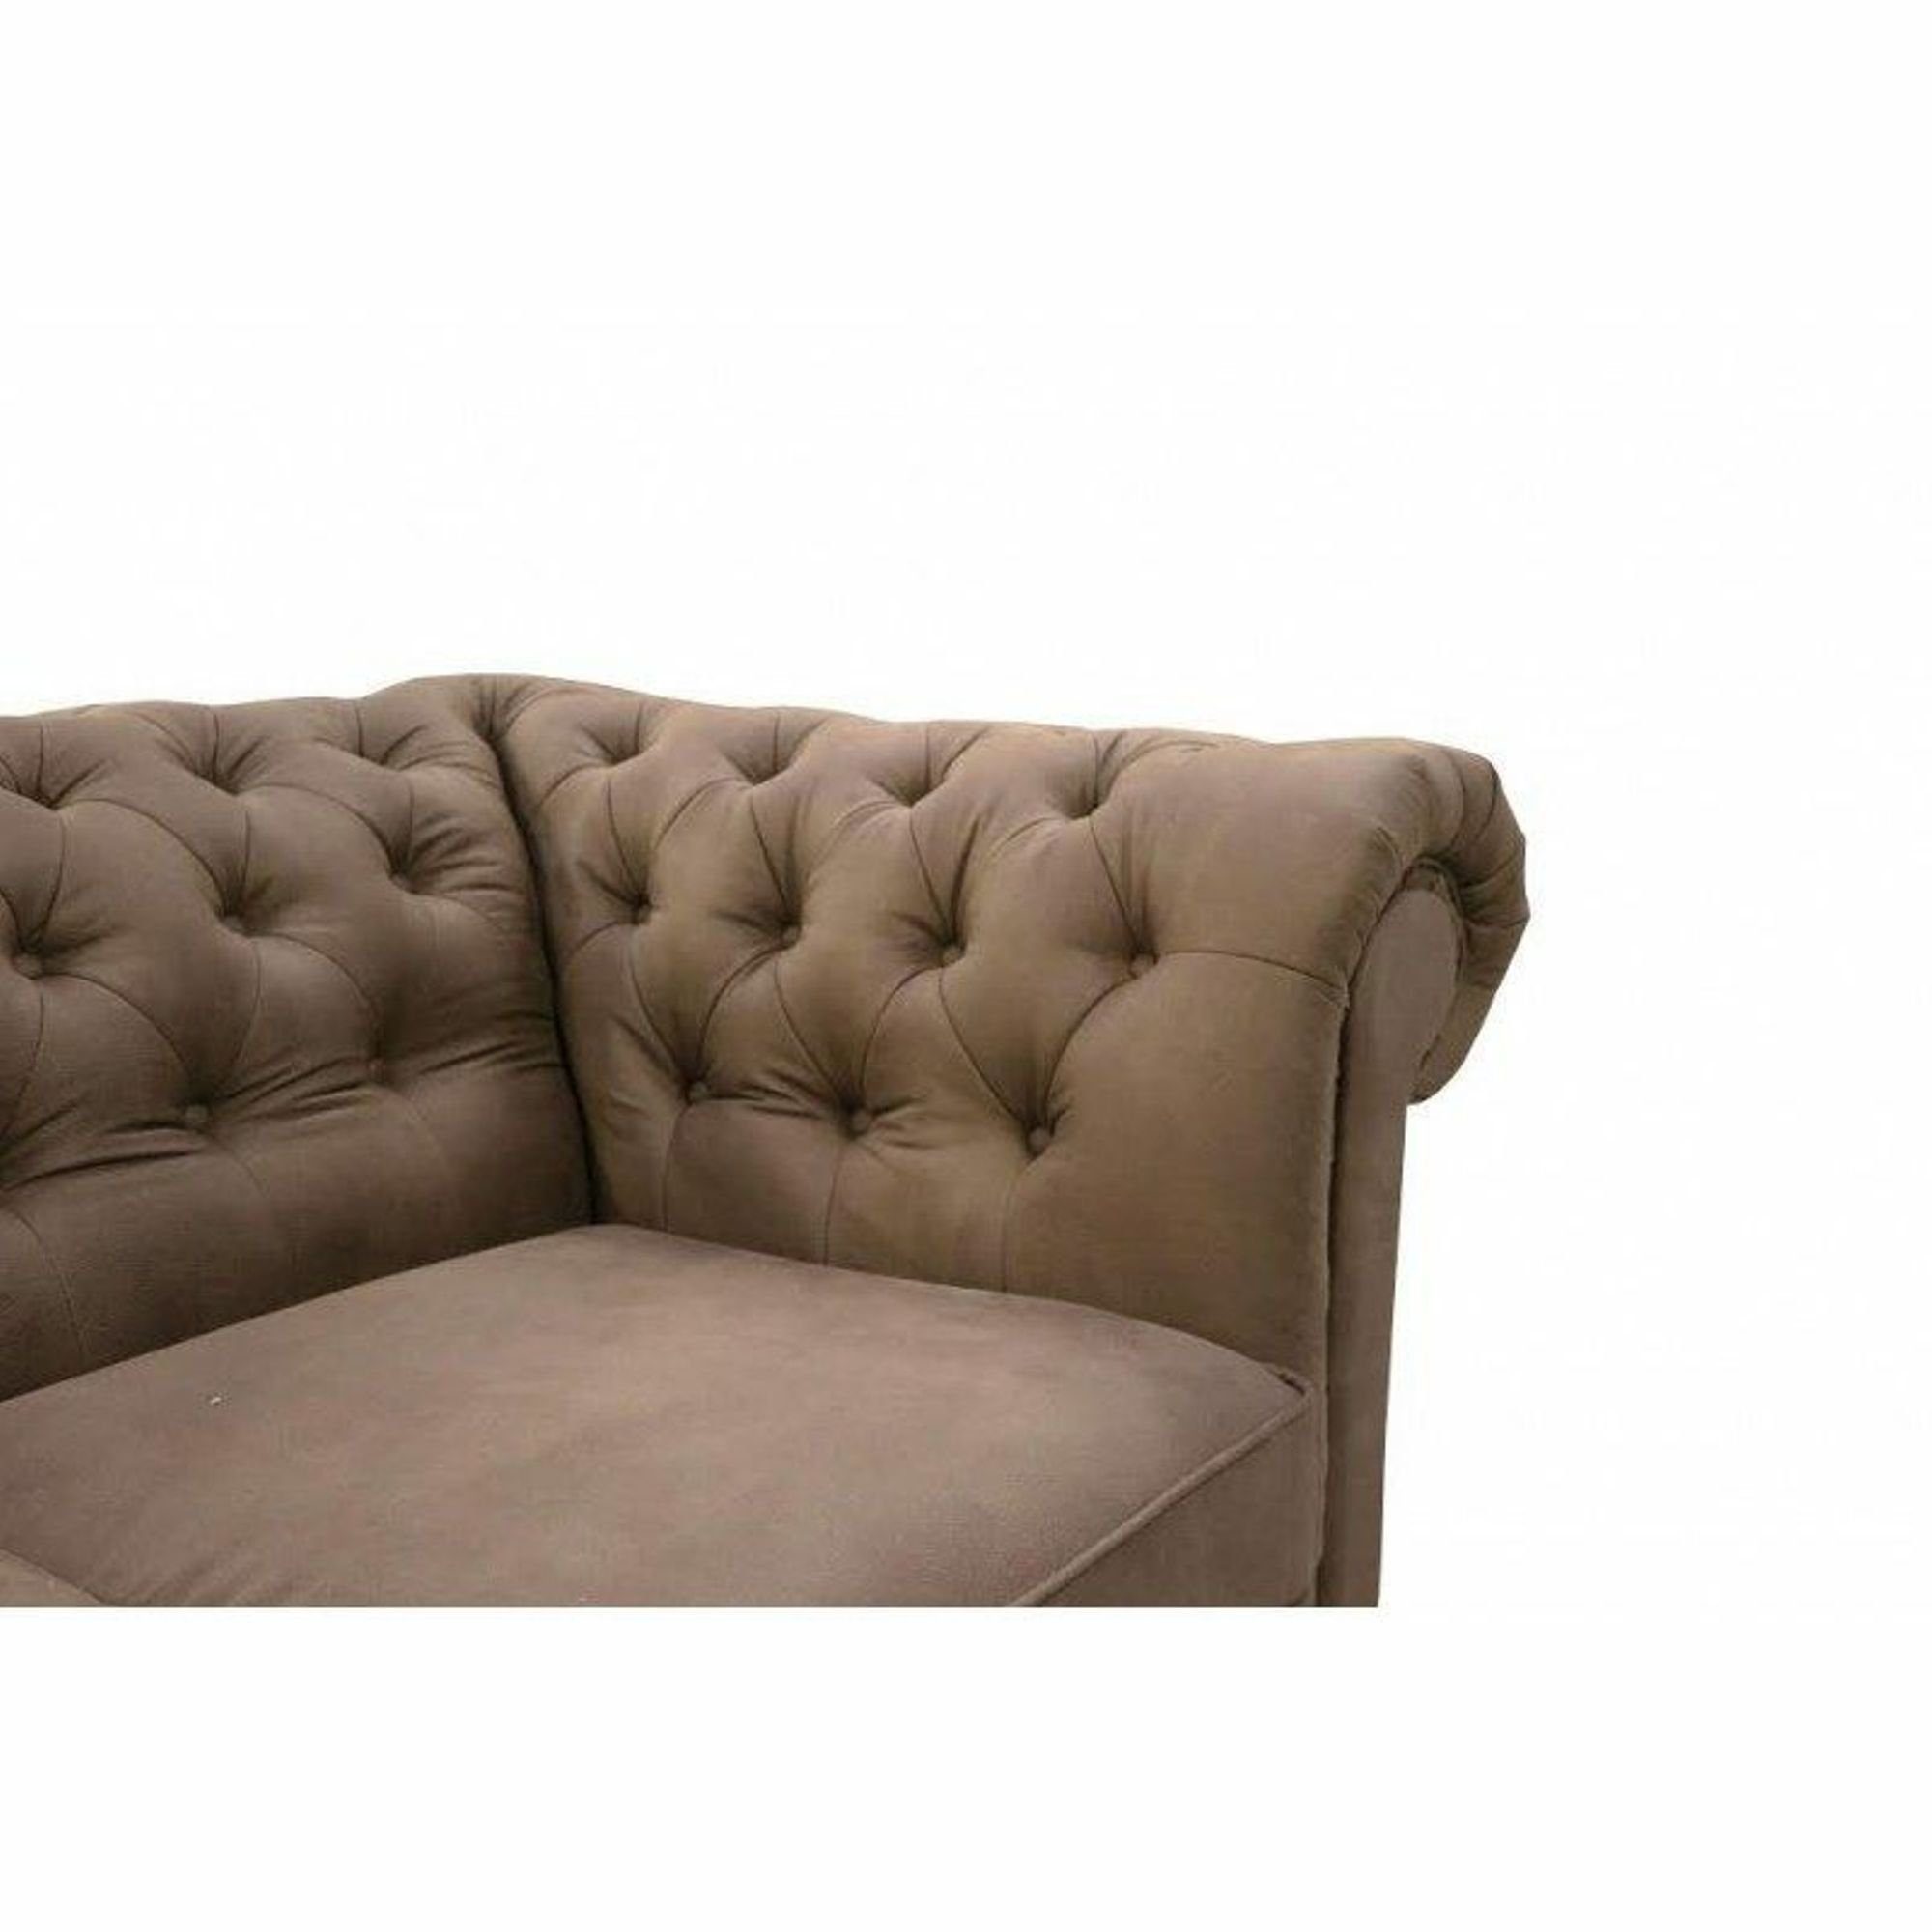 in 3-er luxus Design Chesterfield Couch Made Taupe Chesterfield-Sofa Sofort JVmoebel Neu, Europe Modern